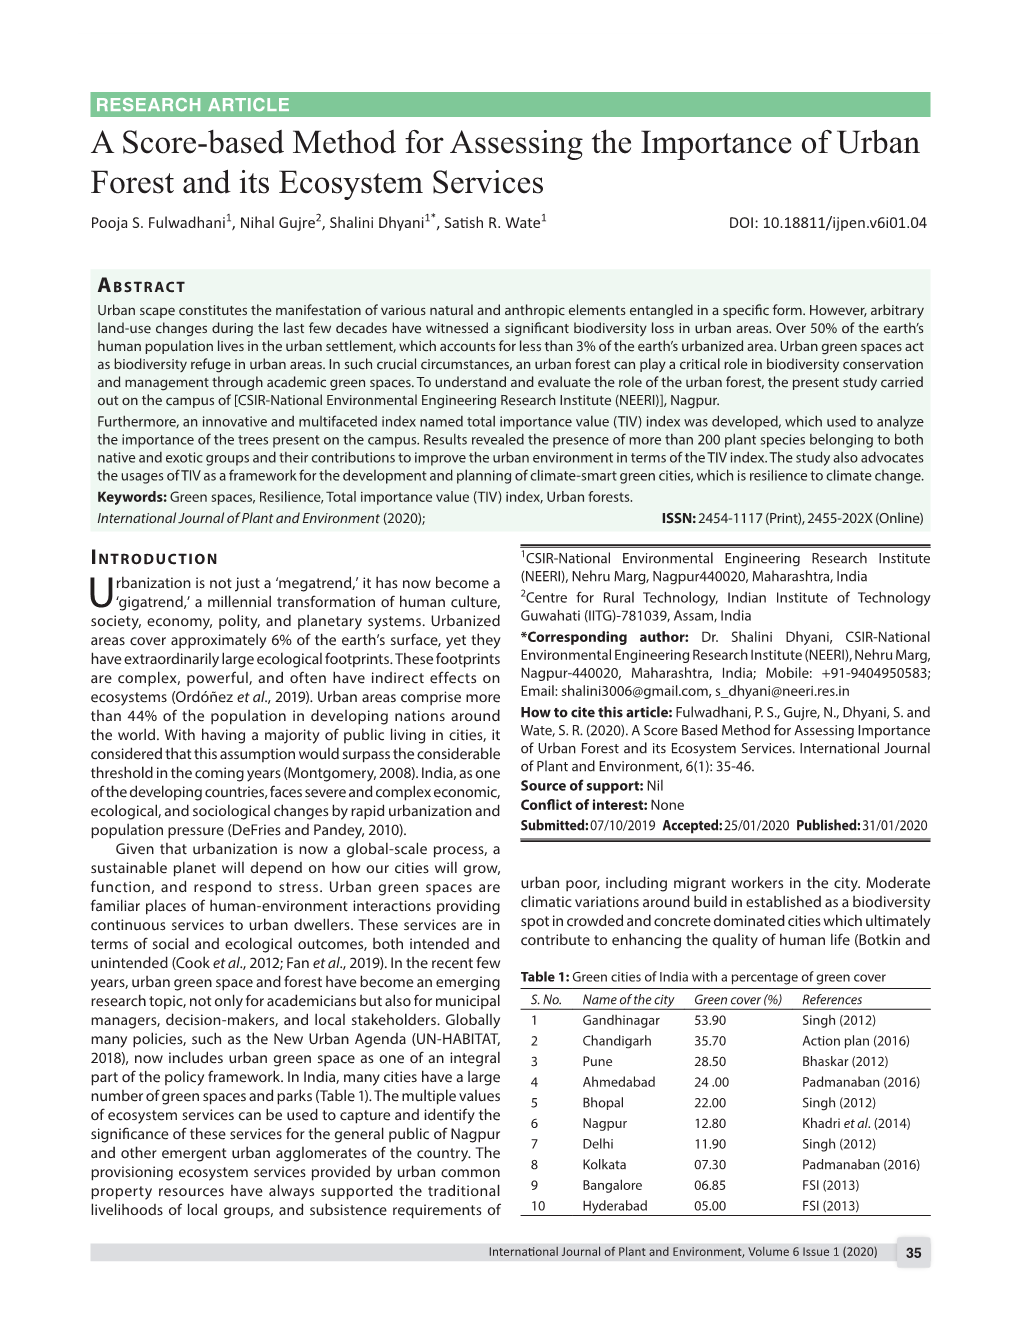 A Score-Based Method for Assessing the Importance of Urban Forest and Its Ecosystem Services Pooja S